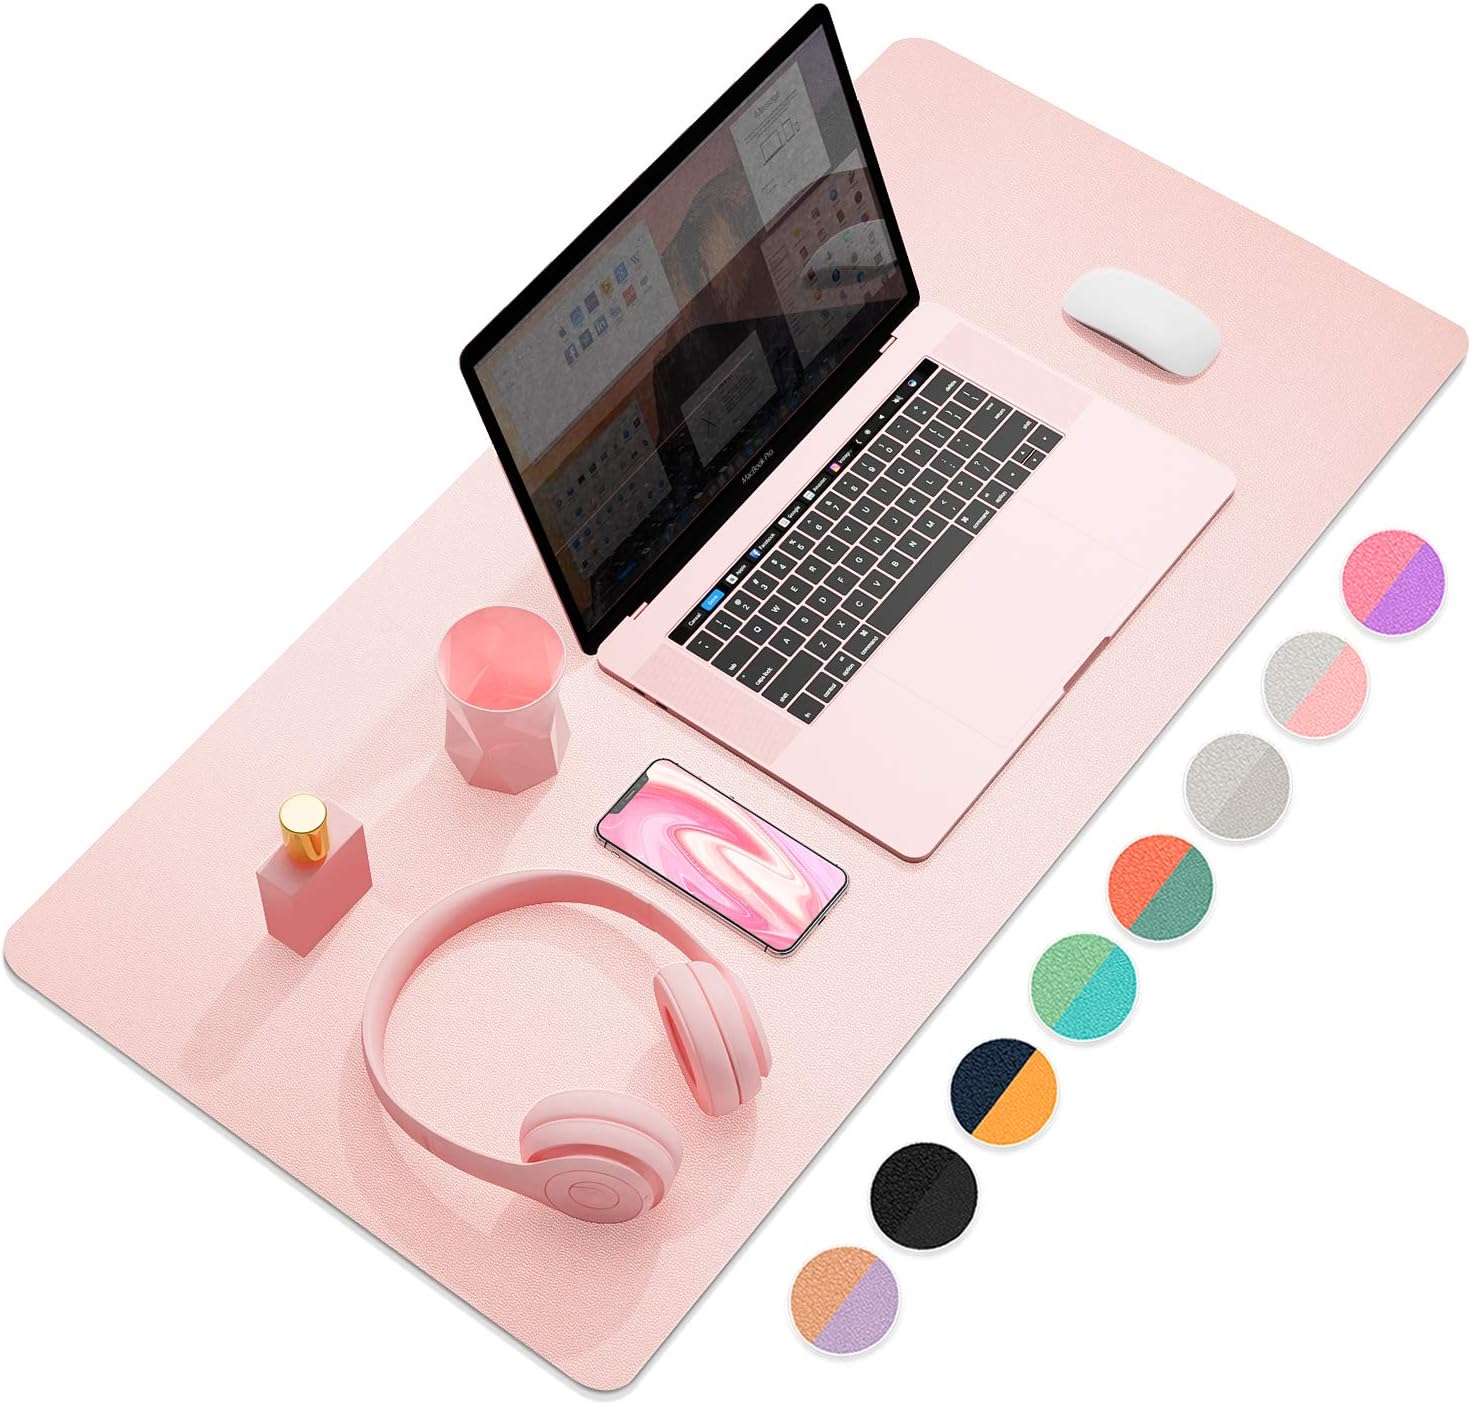 Dual-Sided Multifunctional Desk Pad, Waterproof Desk Blotter Protector, Leather Desk Wrting Mat Mouse Pad (31.5" x 15.7", Pink)